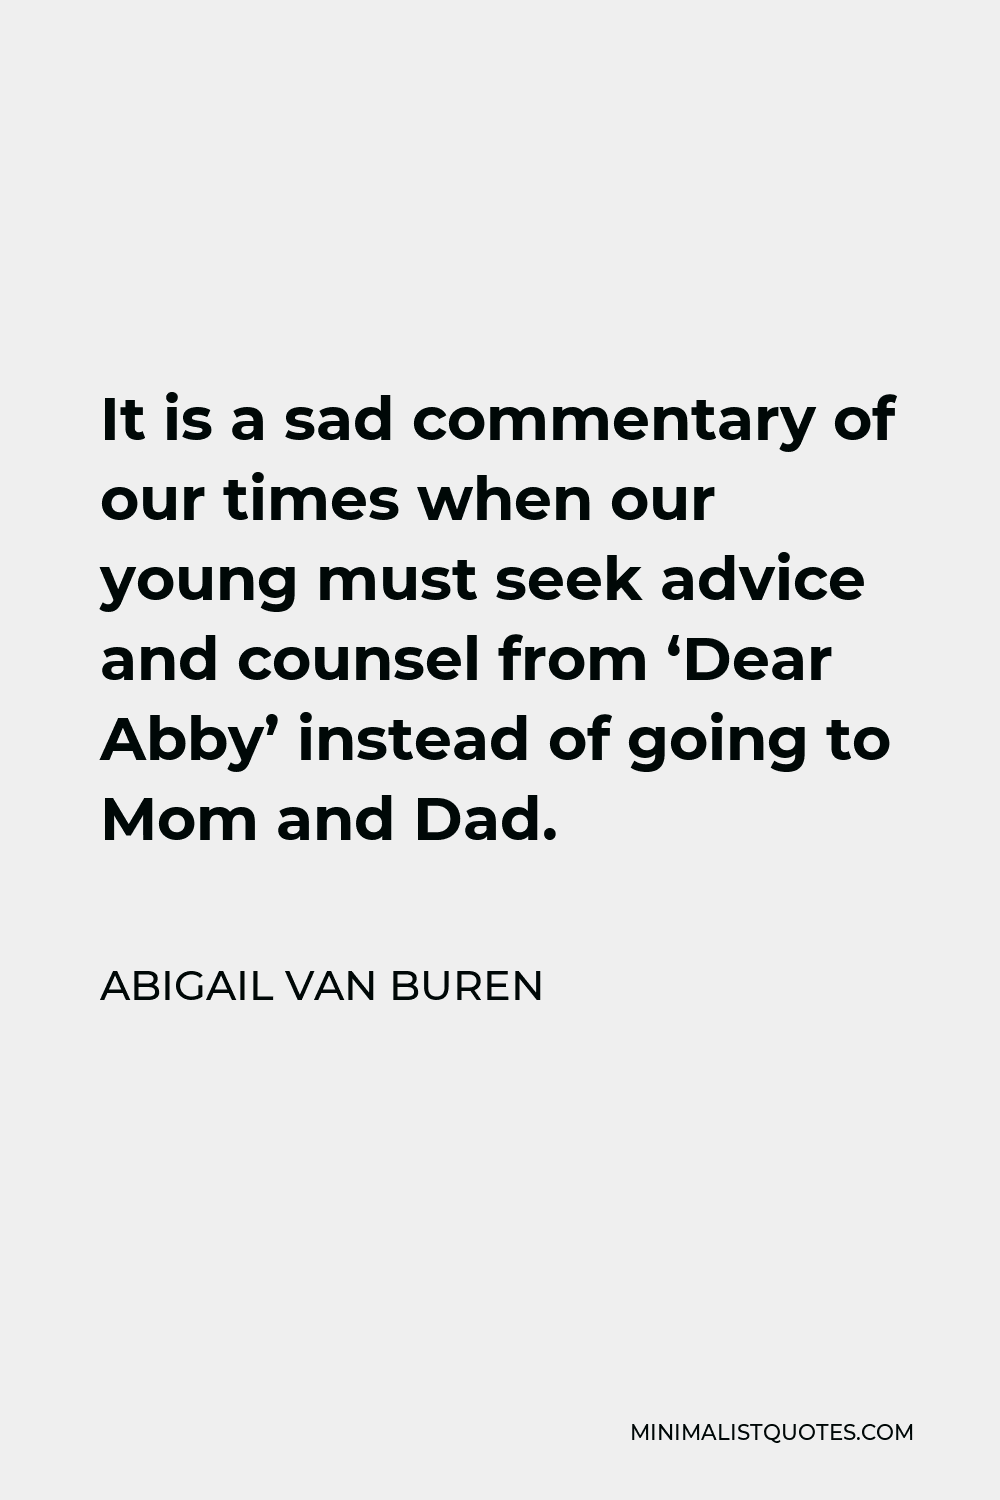 Abigail Van Buren Quote - It is a sad commentary of our times when our young must seek advice and counsel from ‘Dear Abby’ instead of going to Mom and Dad.